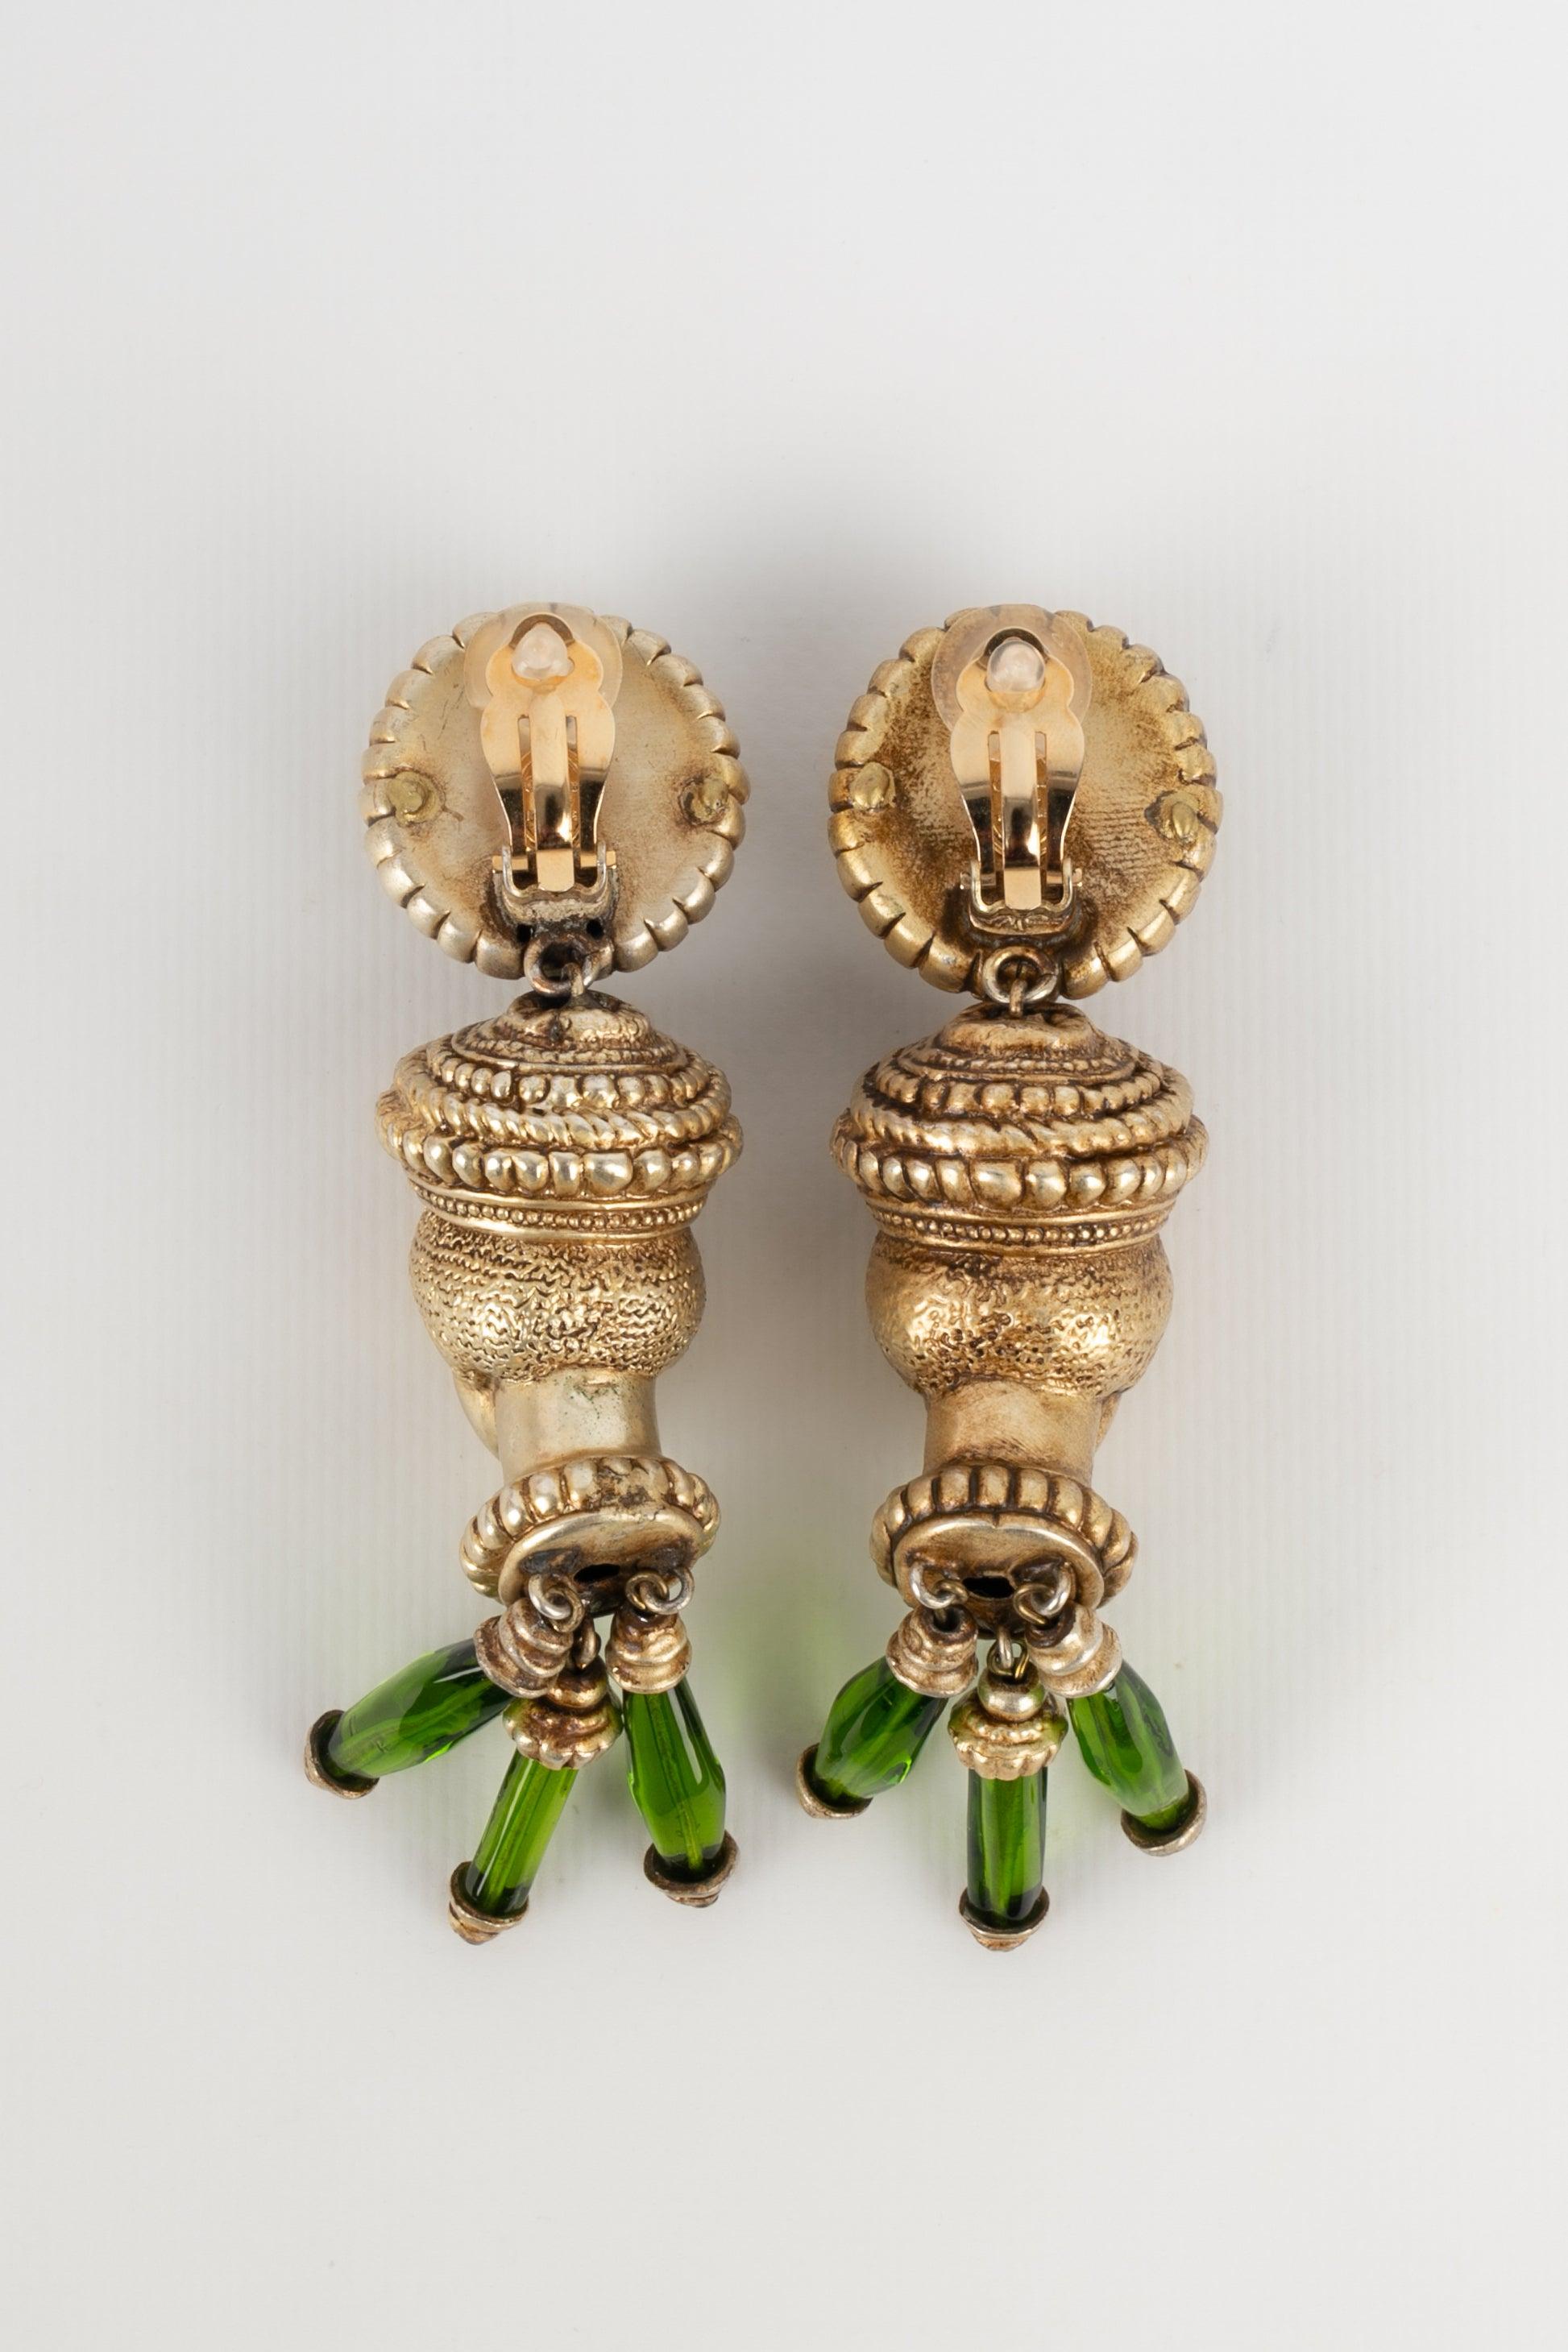 Christian Dior - Golden metal clip-on earrings with glass paste representing a woman's chest. Spring-Summer Haute Couture 2001 Collection.

Additional information:
Condition: Very good condition
Dimensions: Height: 11 cm
Period: 21st Century

Seller